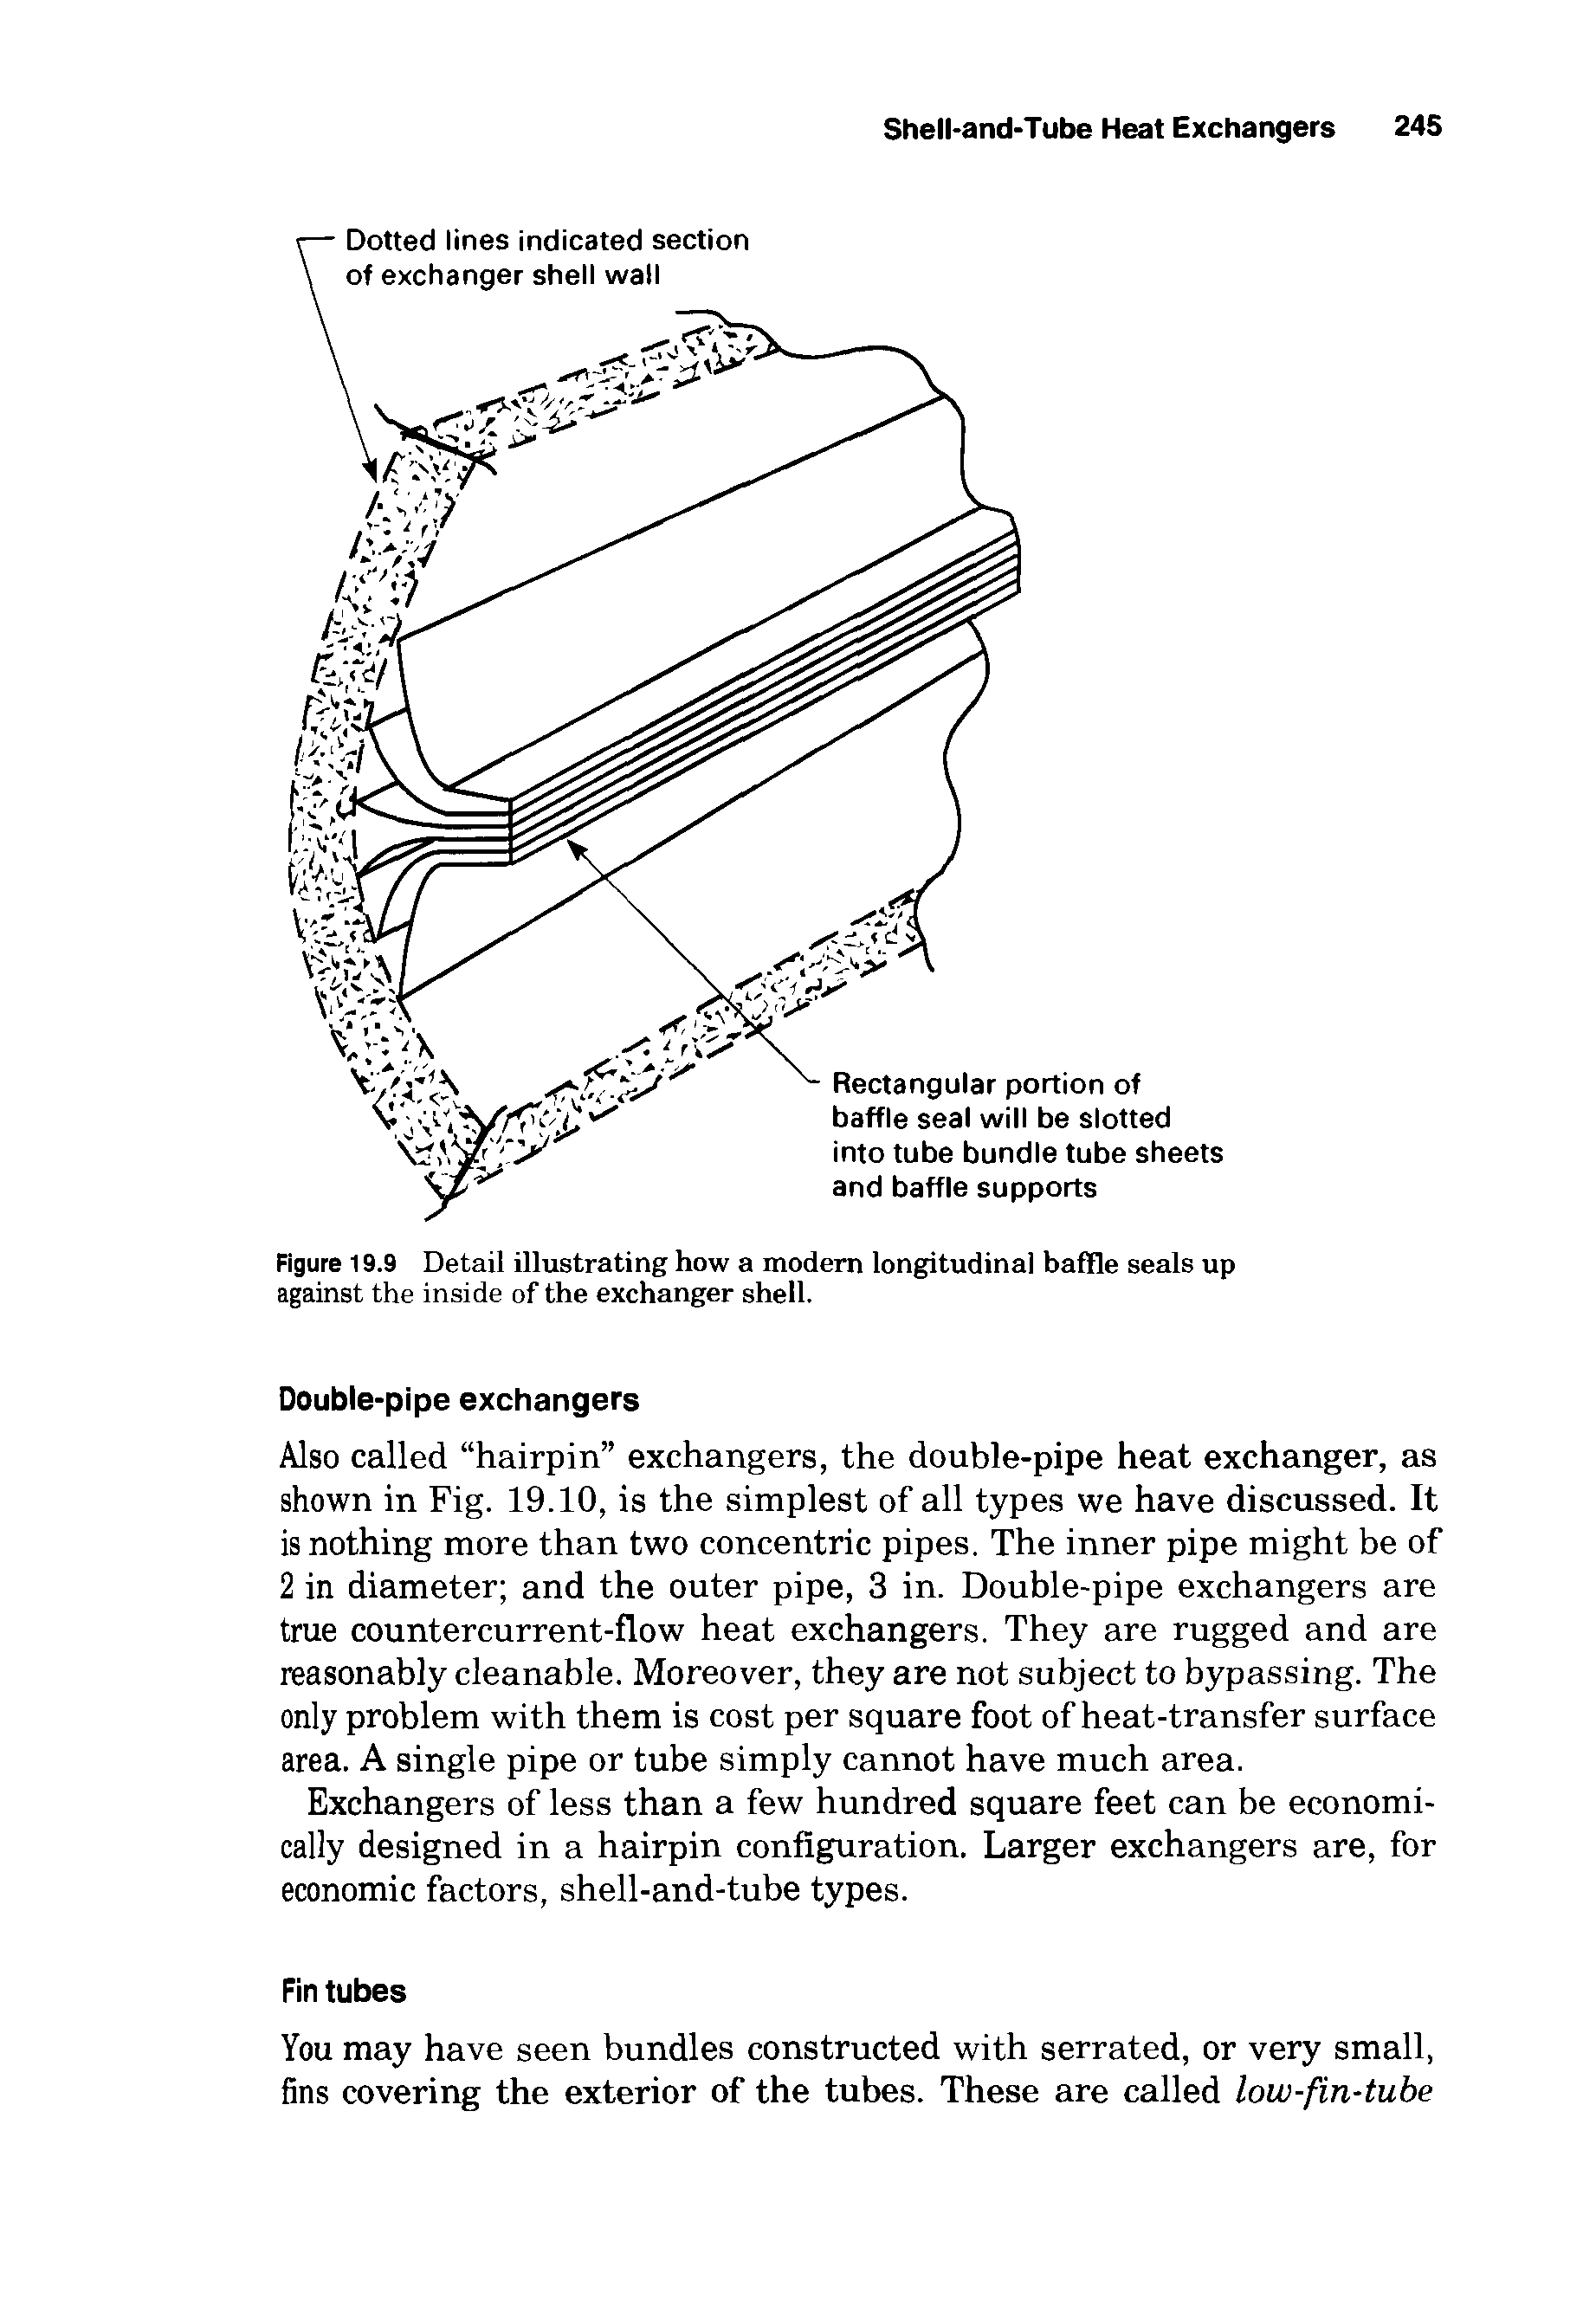 Figure 19.9 Detail illustrating how a modem longitudinal baffle seals up against the inside of the exchanger shell.